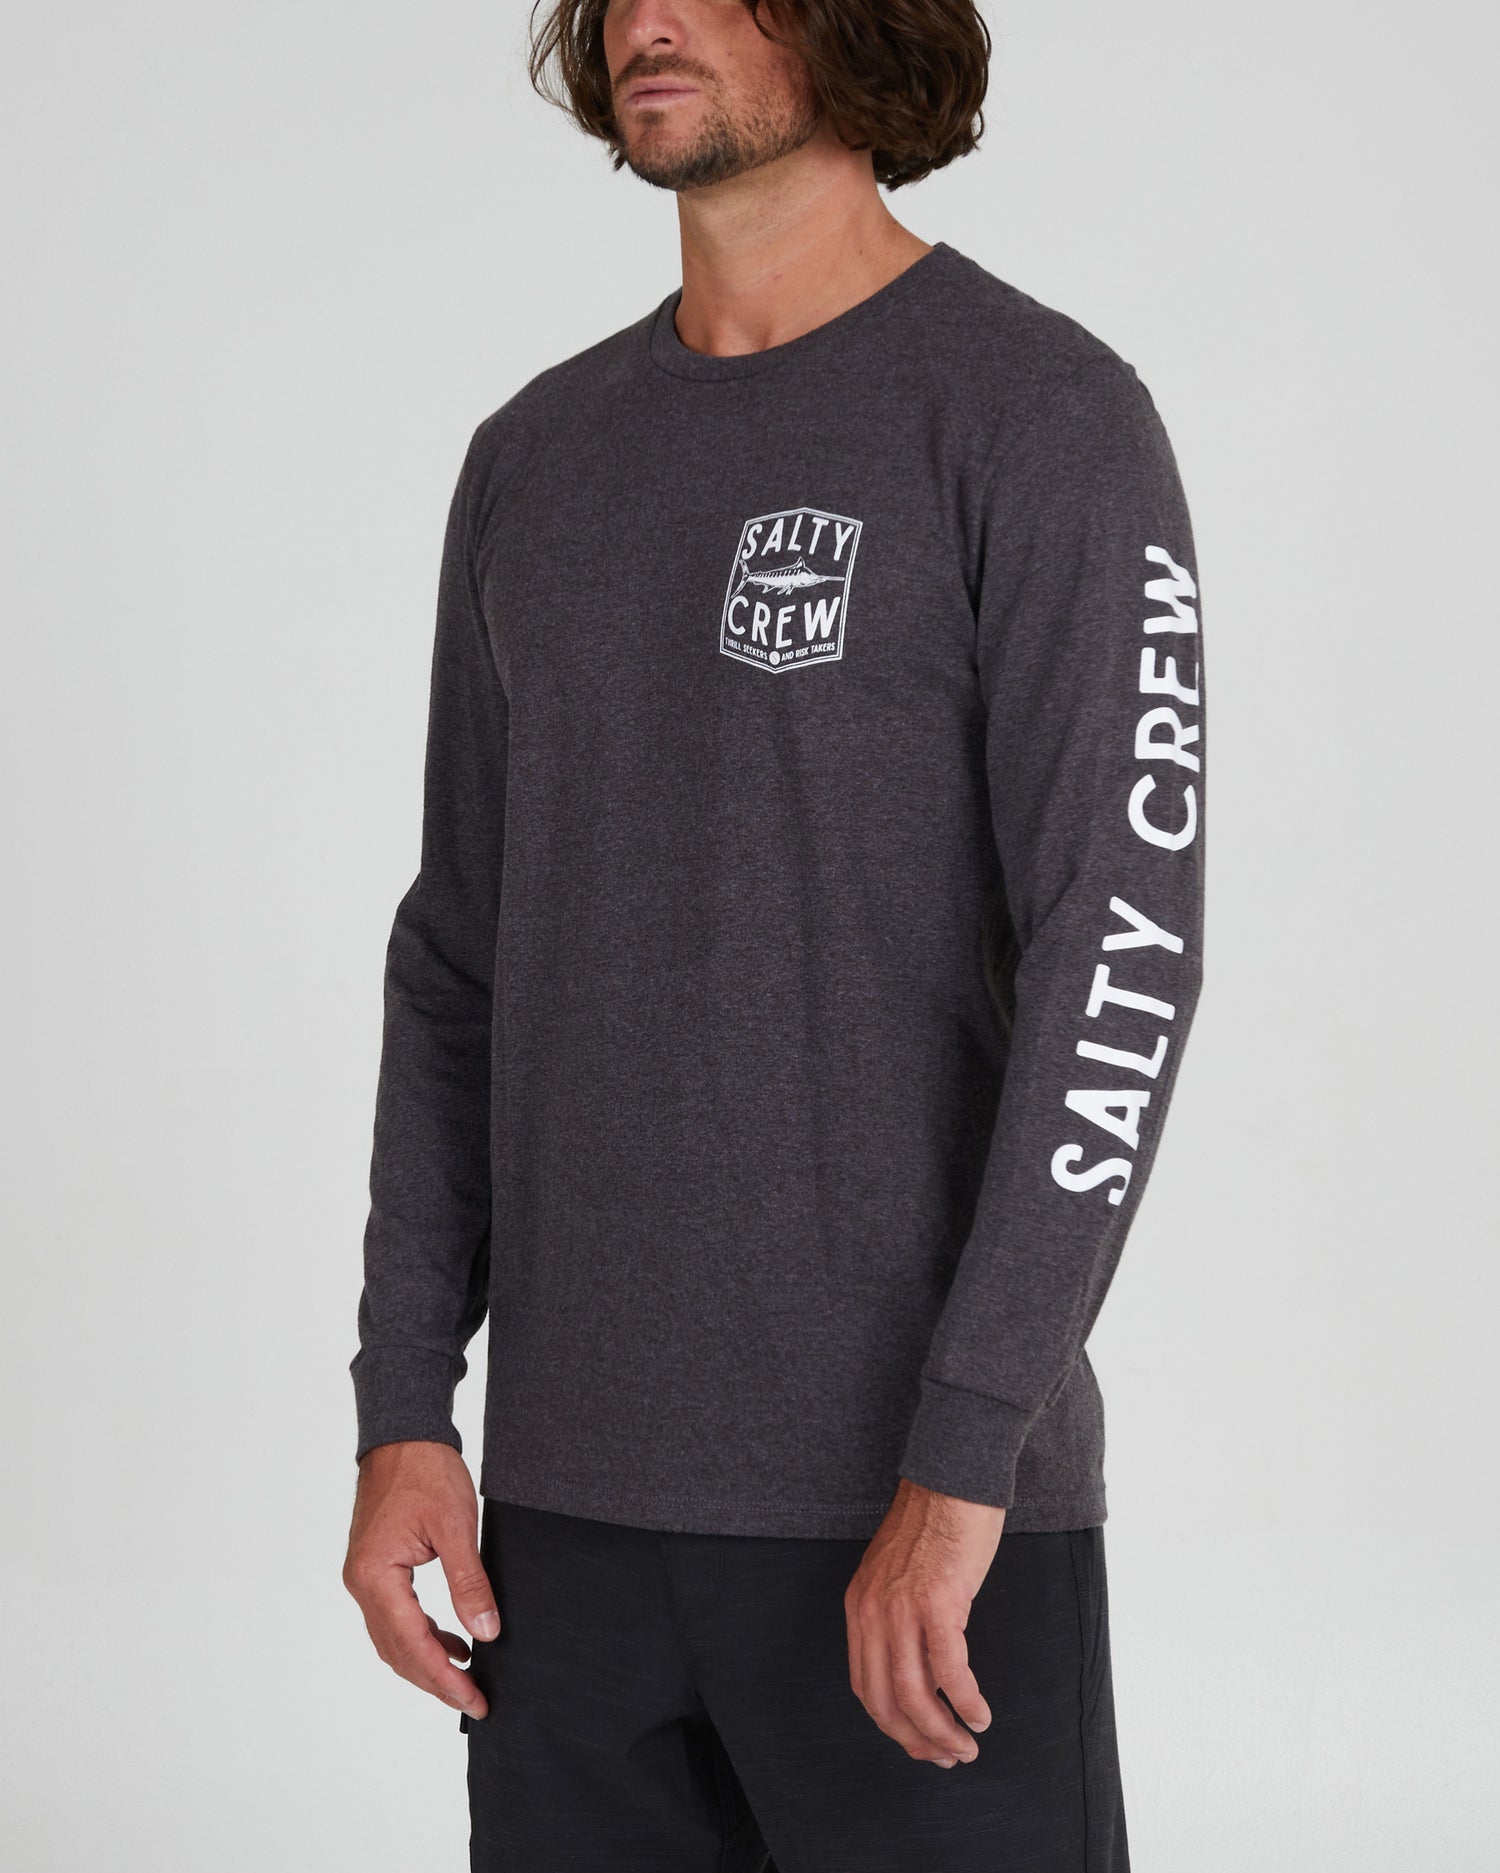 On body front angle of the Fishery Charcoal Heather L/S Standard Tee